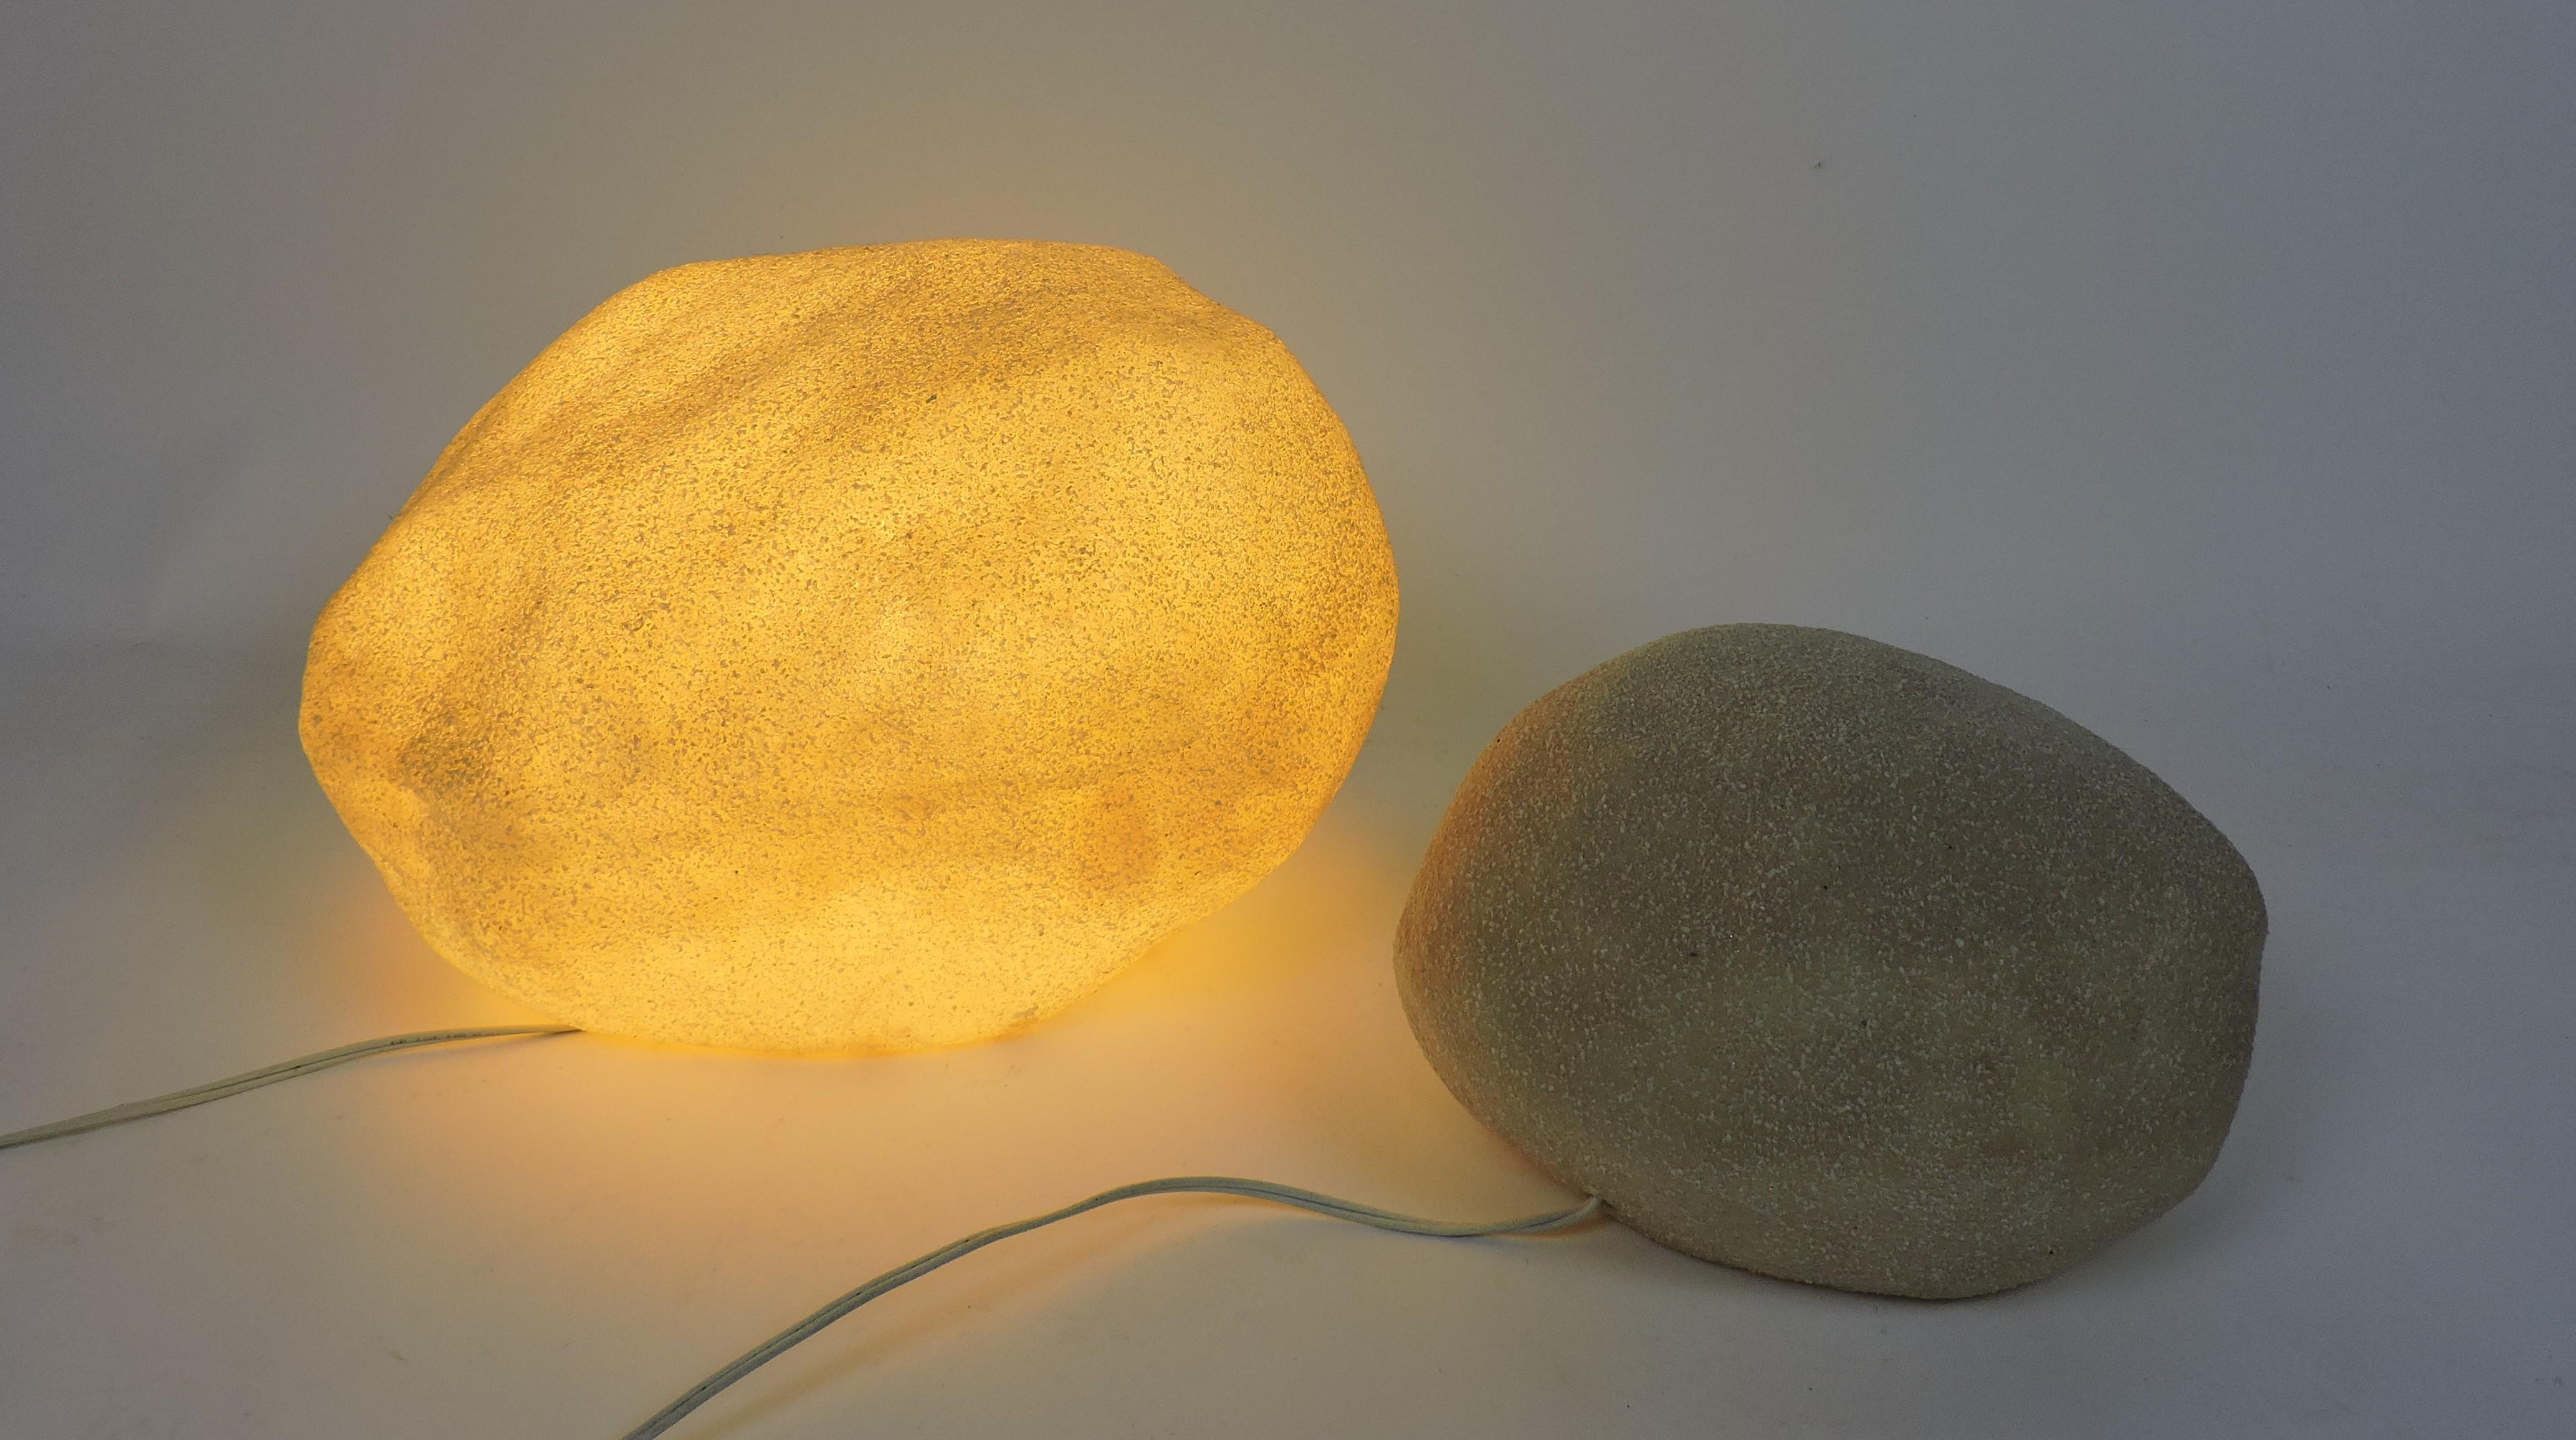 Very cool luminescent set of 2 moon rocks designed by Andre Cazenave and manufactured in Italy by Singleton in the 1970s. These lamps are made of translucent resin with marble powder inclusions and glow with a soft ambient light when lit. The larger